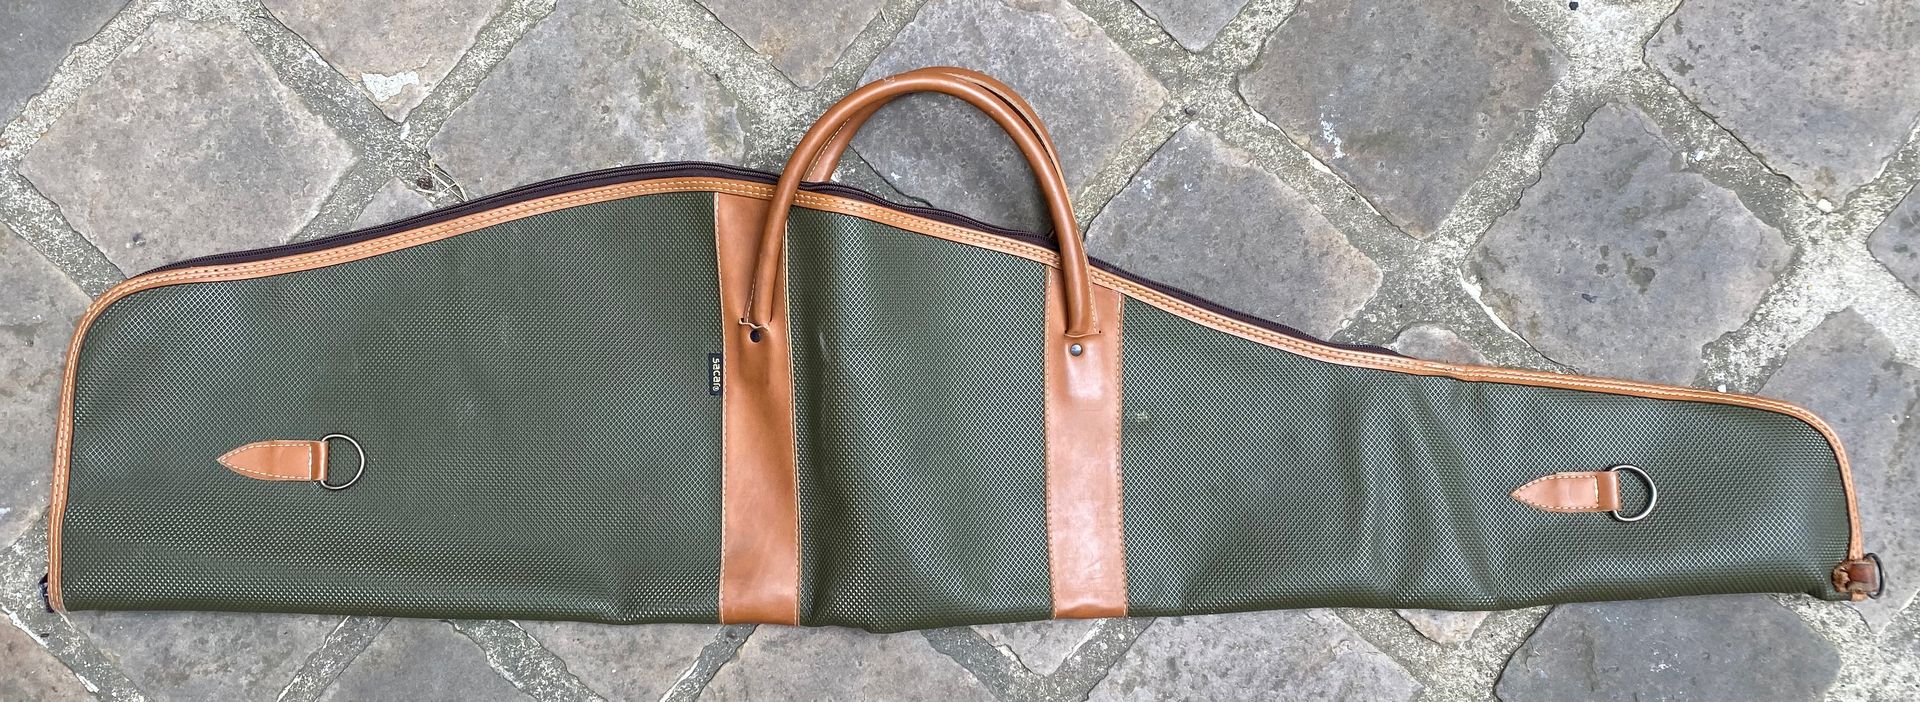 Null Hunting rifle case in green canvas and brown leather. Brand Sacar.